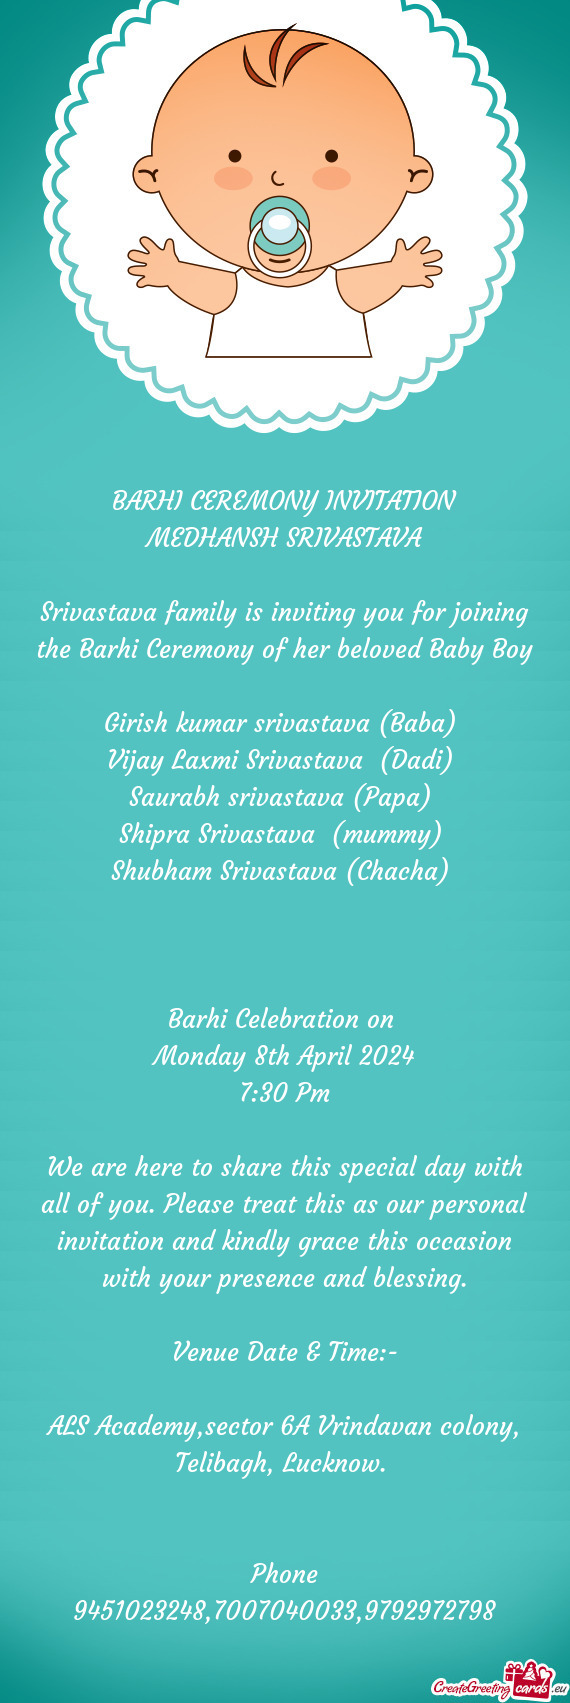 Srivastava family is inviting you for joining the Barhi Ceremony of her beloved Baby Boy